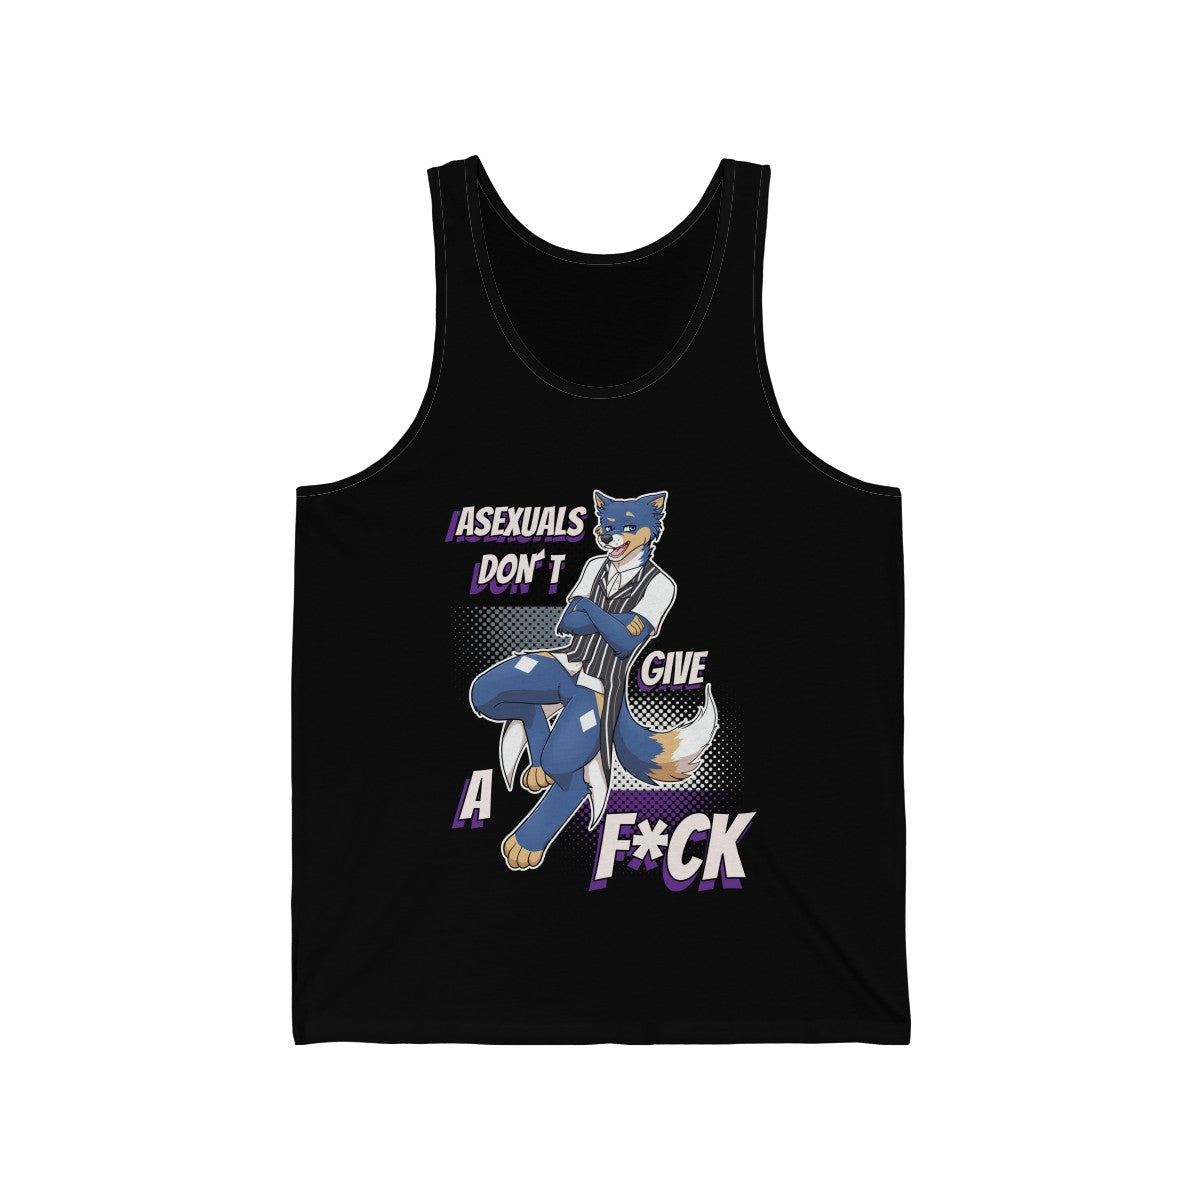 Asexual Don't Give A F*ck - Tank Top Tank Top Artemis Wishfoot Black XS 